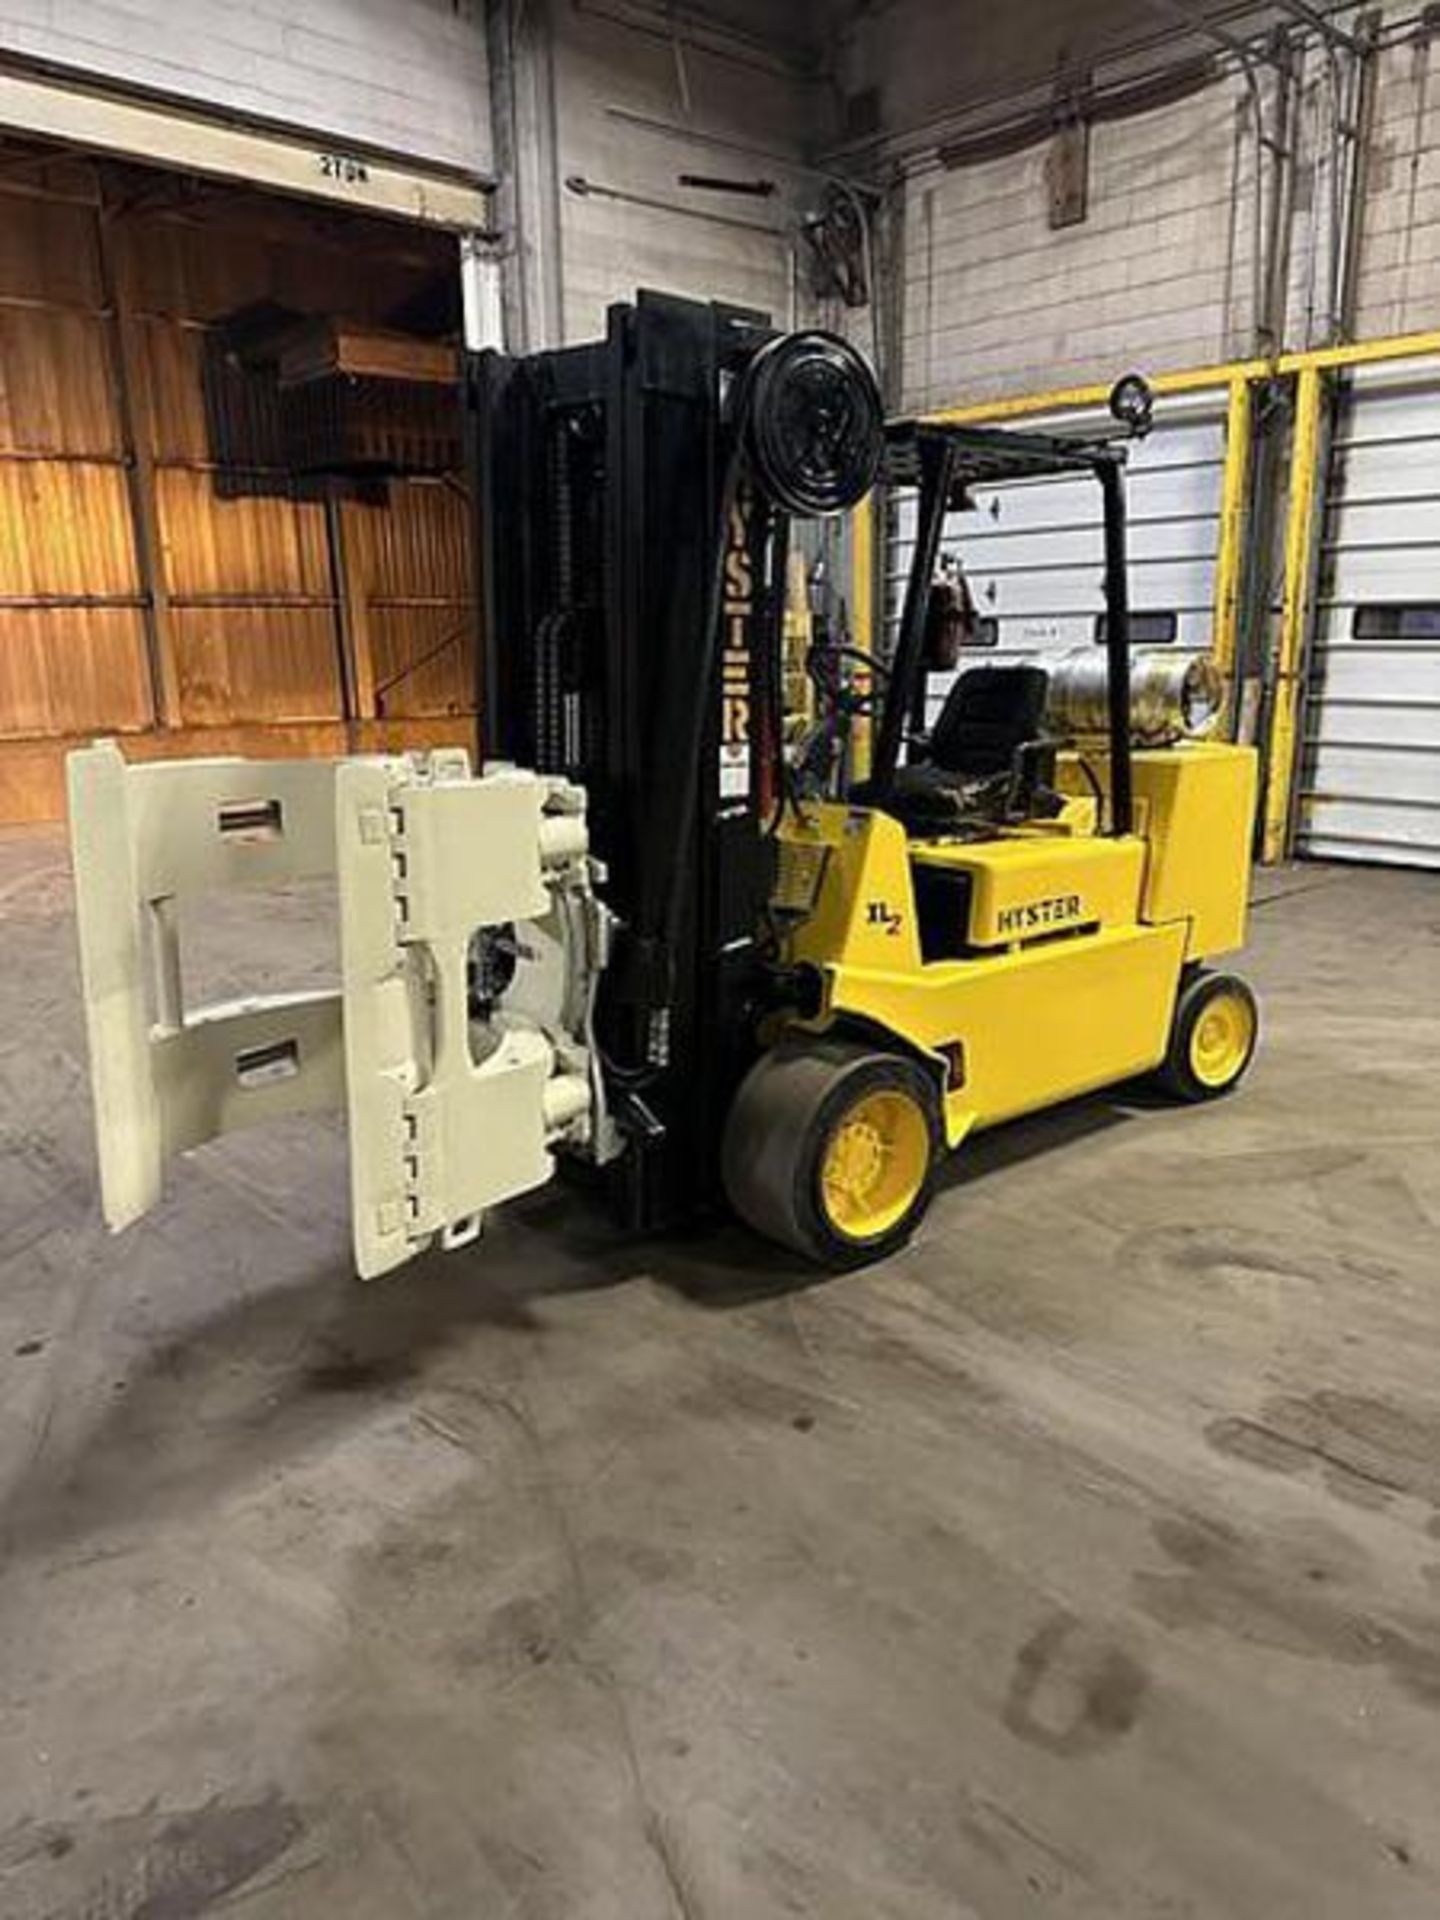 12,000 POUND HYSTER S120XLS FORKLIFT WITH PAPER ROLL CLAMP - Image 4 of 9